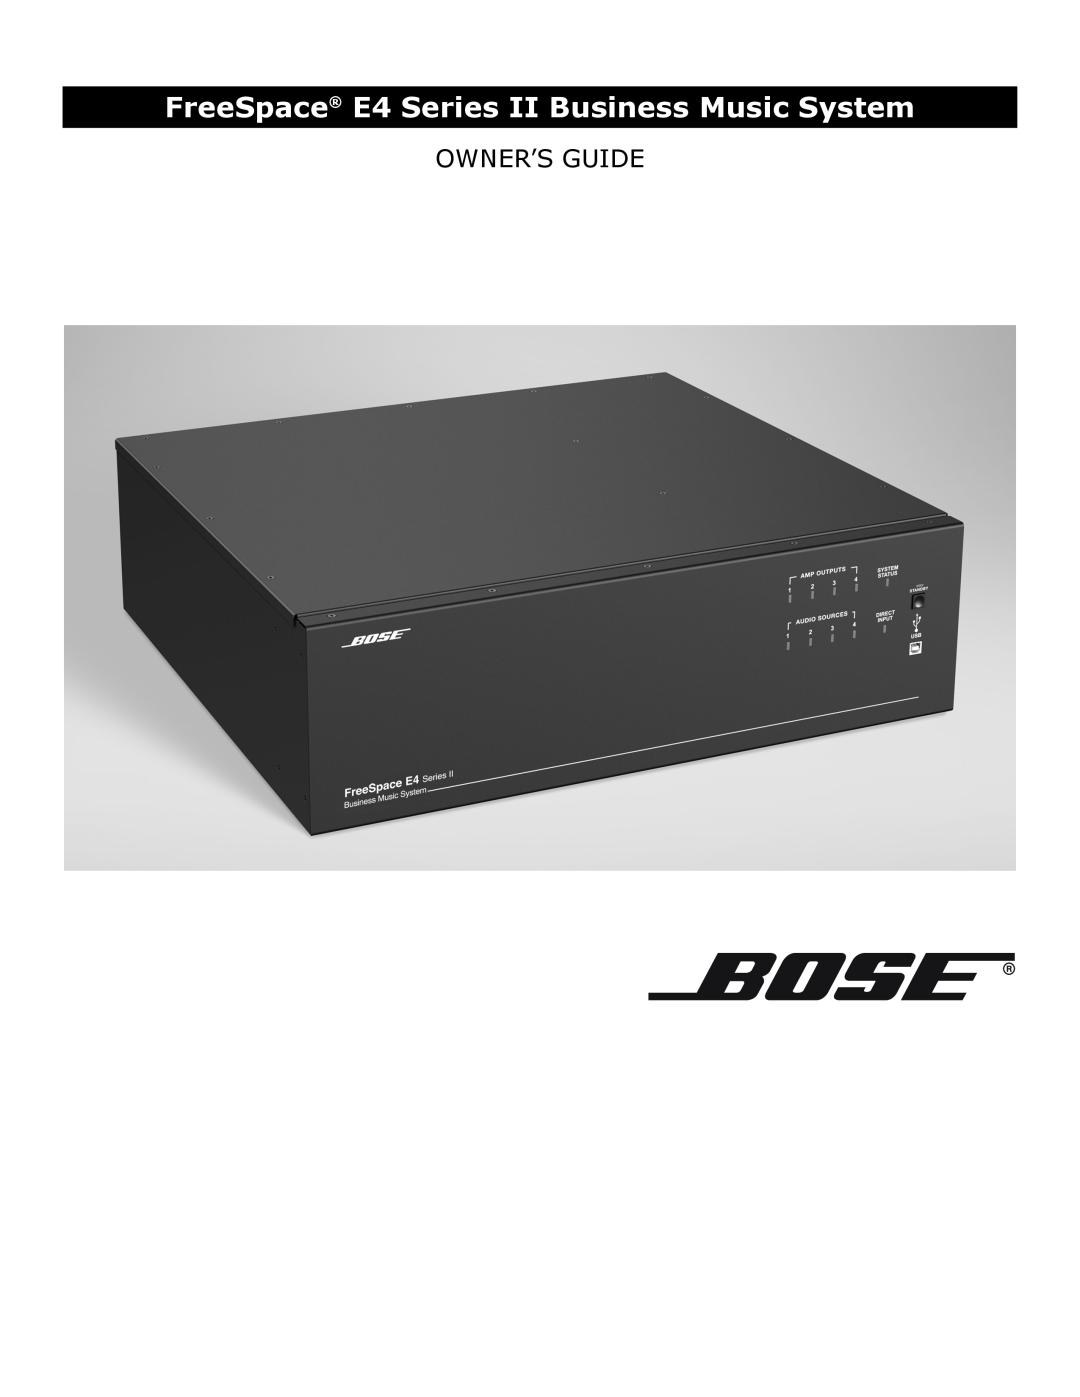 Bose quick start FreeSpace E4 Series II System Quick Start-UpGuide, English, Connect your PC to the E4 system 